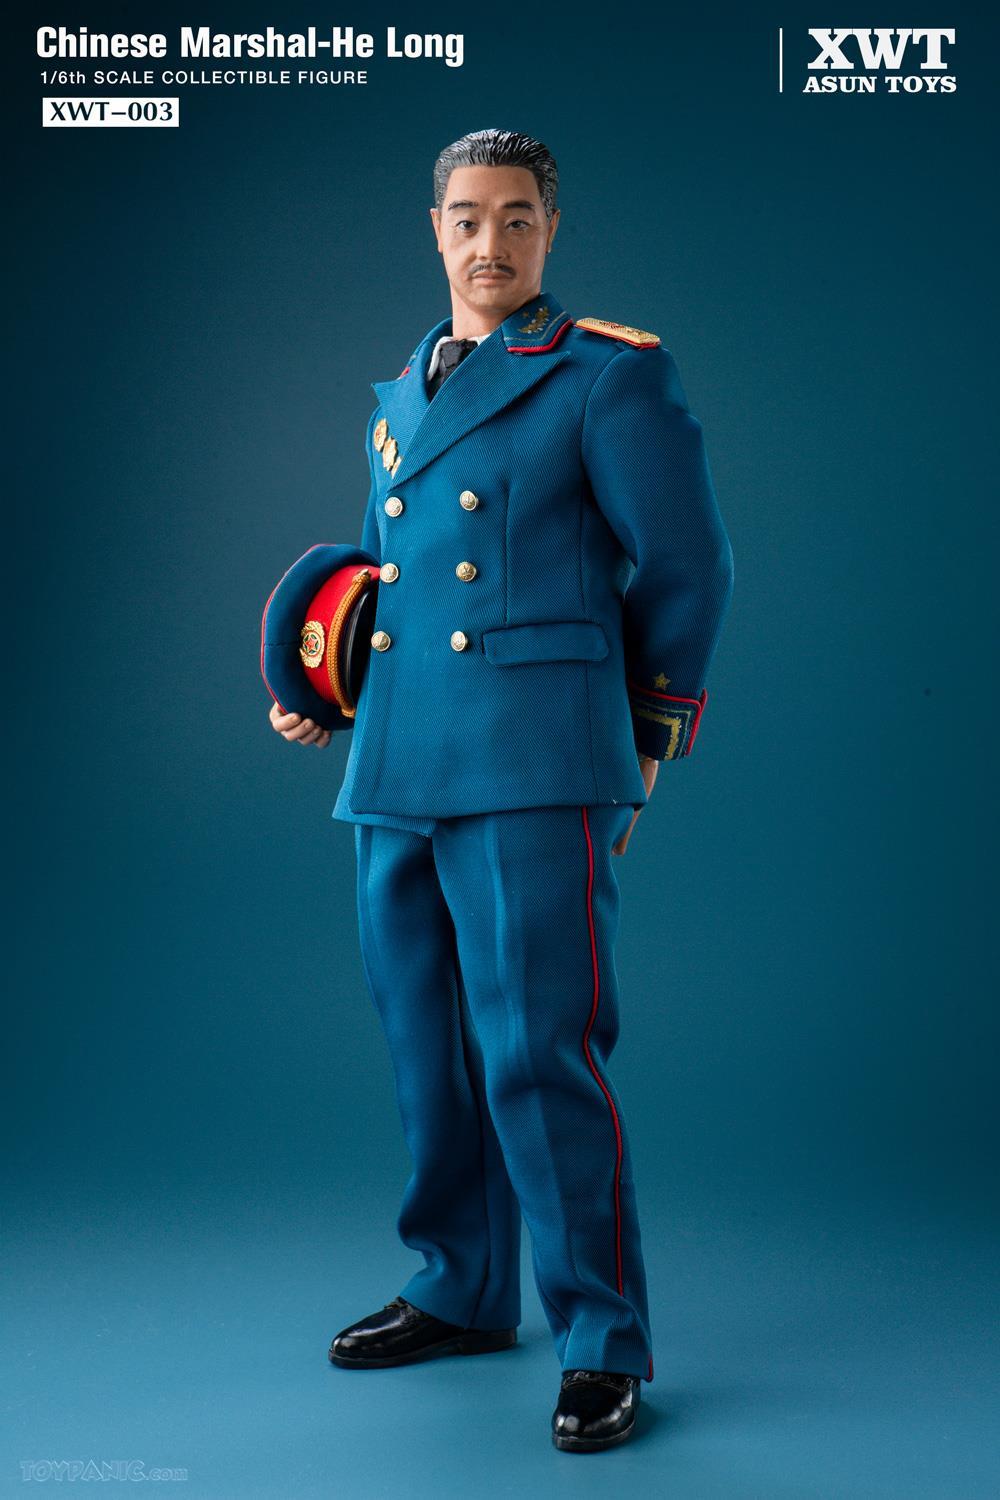 NEW PRODUCT: XWT ASUN TOYS: 1/6 Chinese Marshal - He Long (XWT-003) 14620217